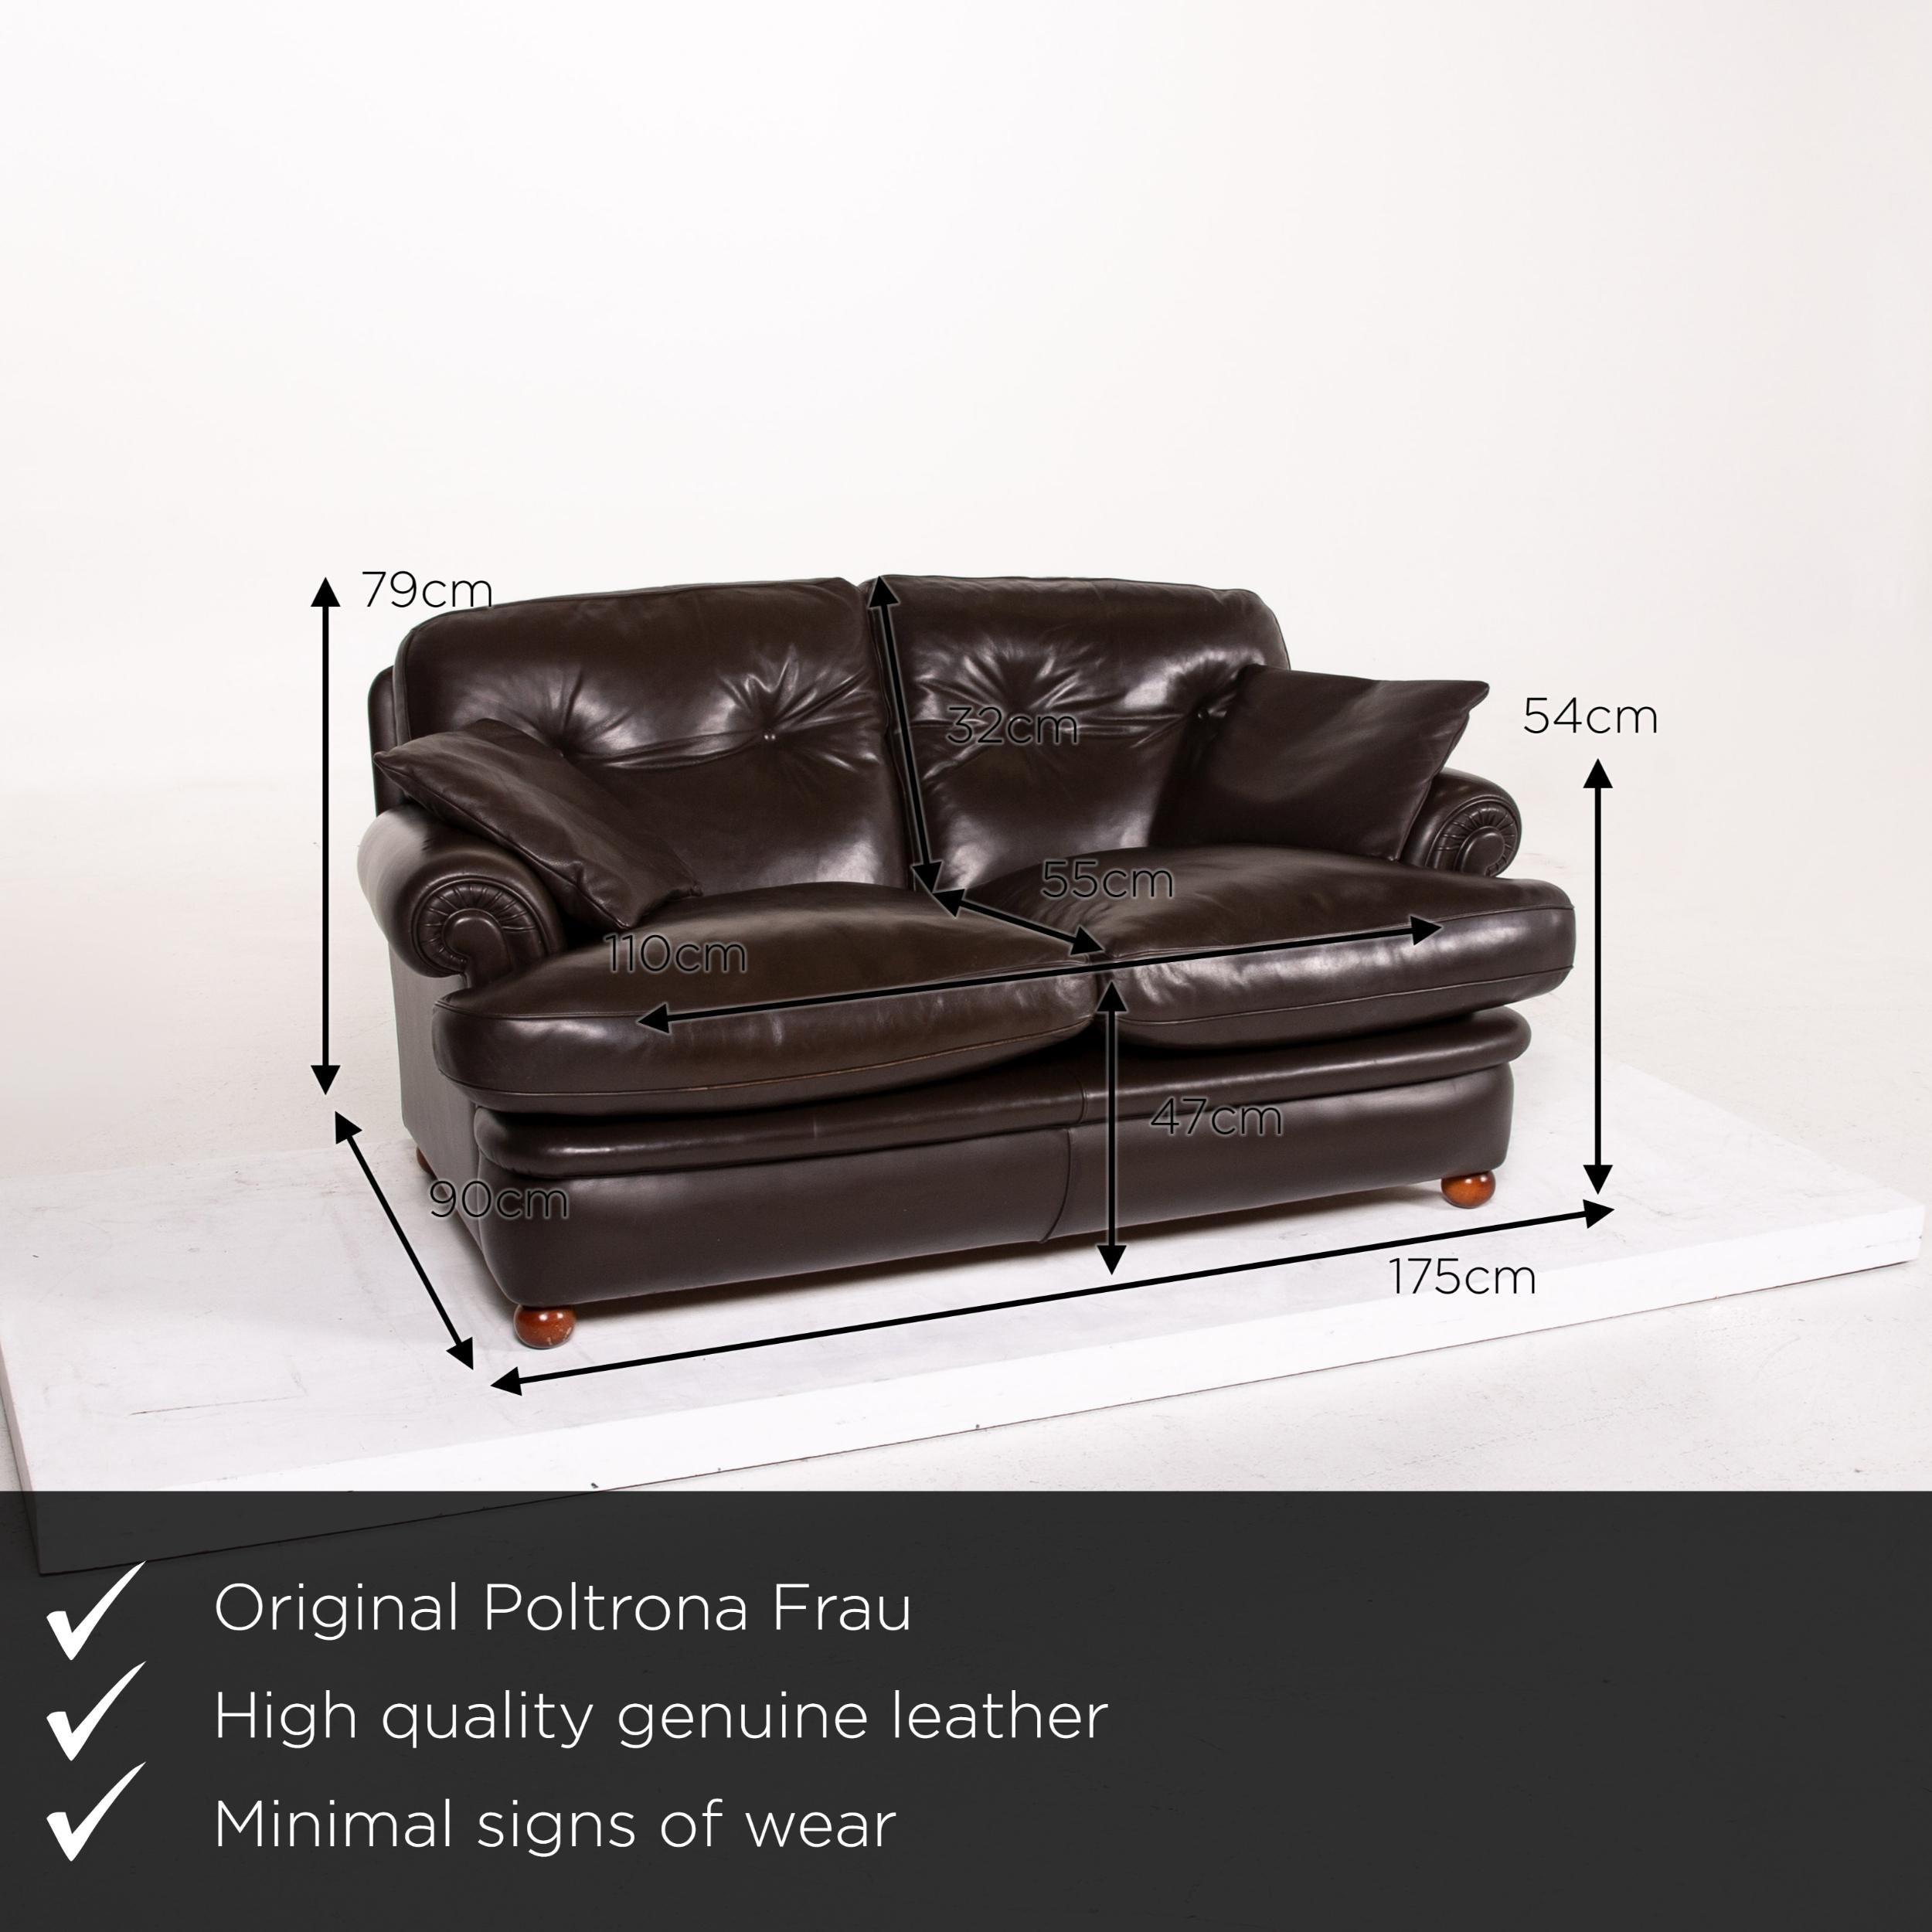 We present to you a Poltrona Frau leather sofa dark brown brown two-seat couch.

 

 Product measurements in centimeters:
 

Depth 90
Width 175
Height 79
Seat height 47
Rest height 54
Seat depth 55
Seat width 110
Back height 32.